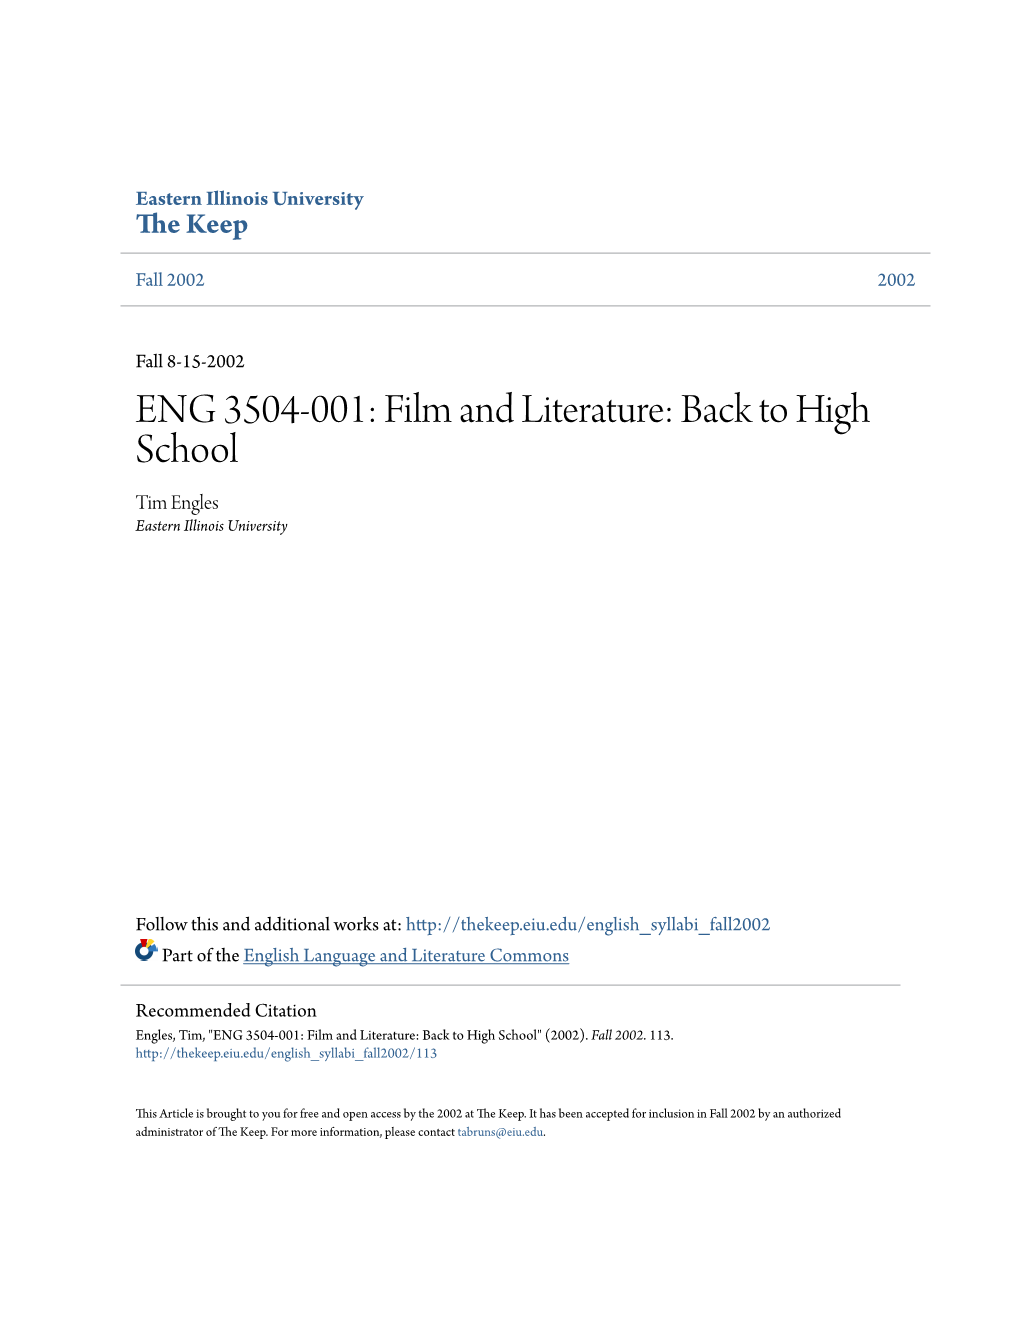 ENG 3504-001: Film and Literature: Back to High School Tim Engles Eastern Illinois University